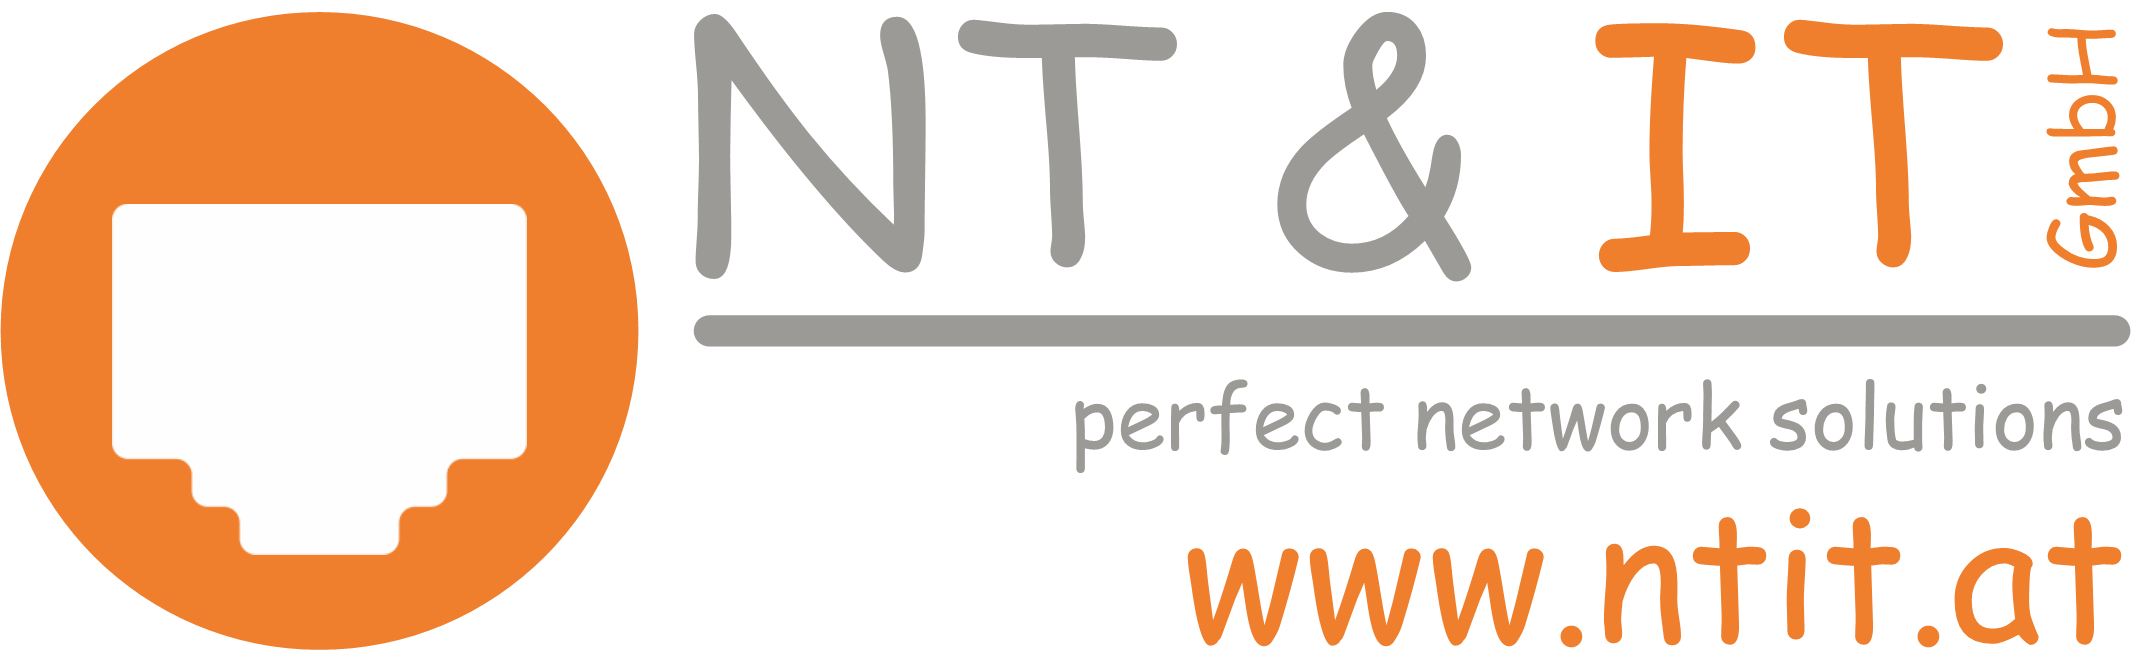 NT & IT GmbH - perfect network solutions